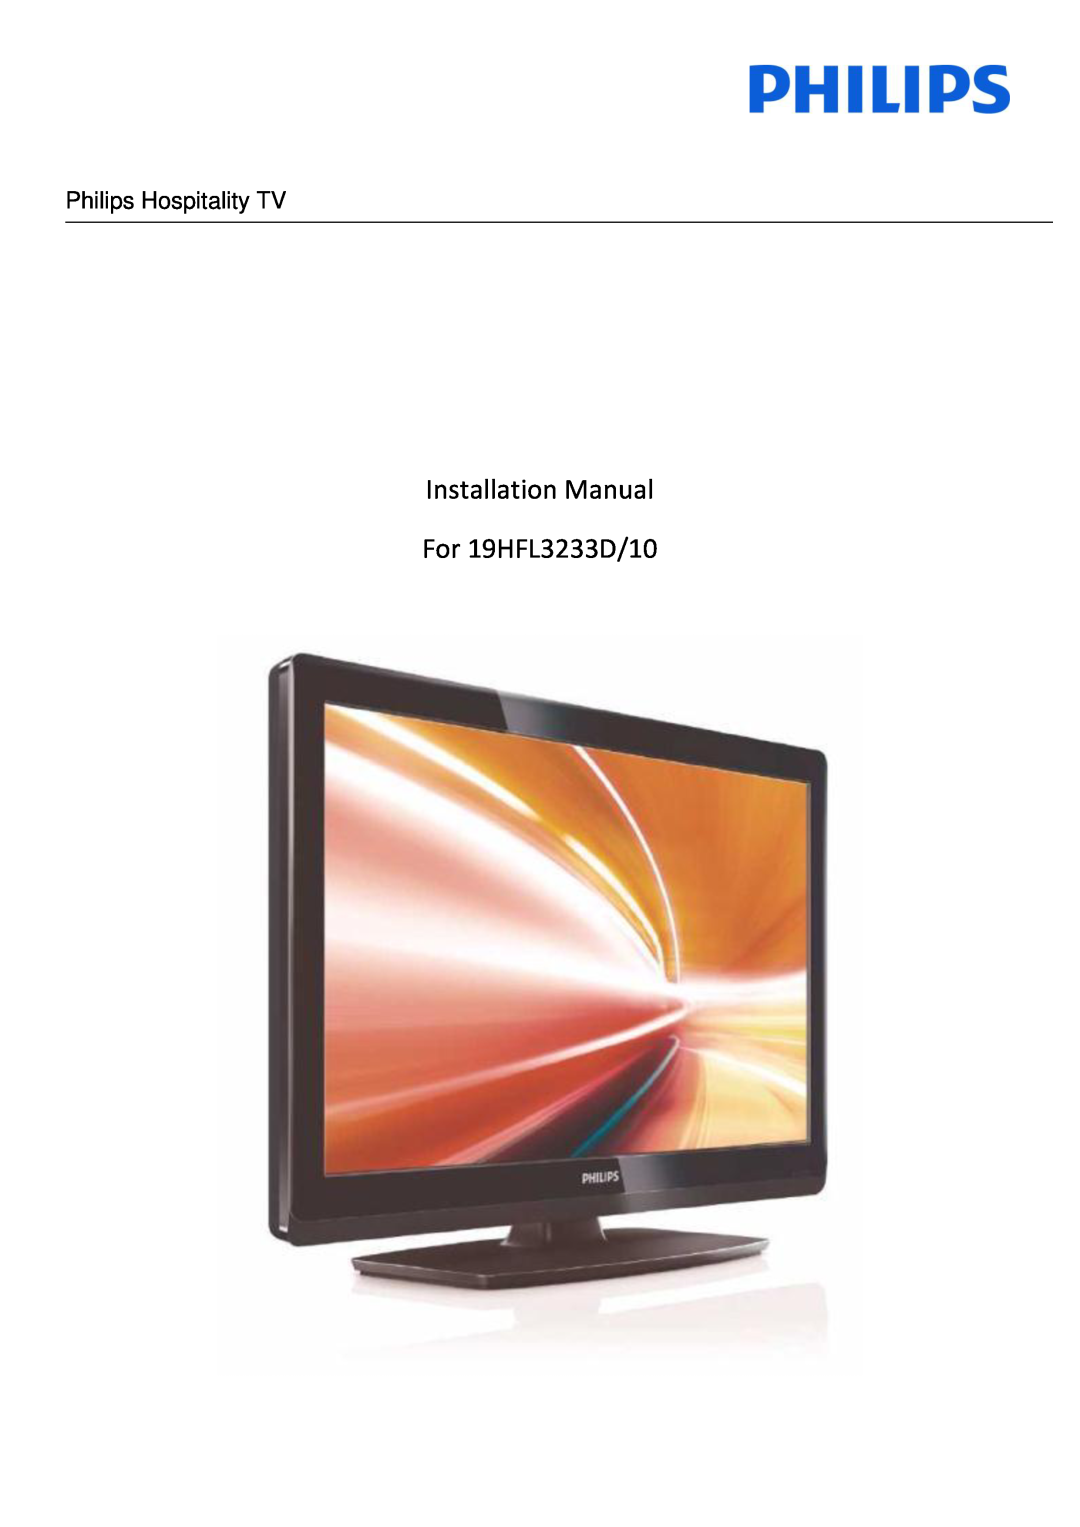 Philips installation manual Installation Manual For 19HFL3233D/10, Philips Hospitality TV 